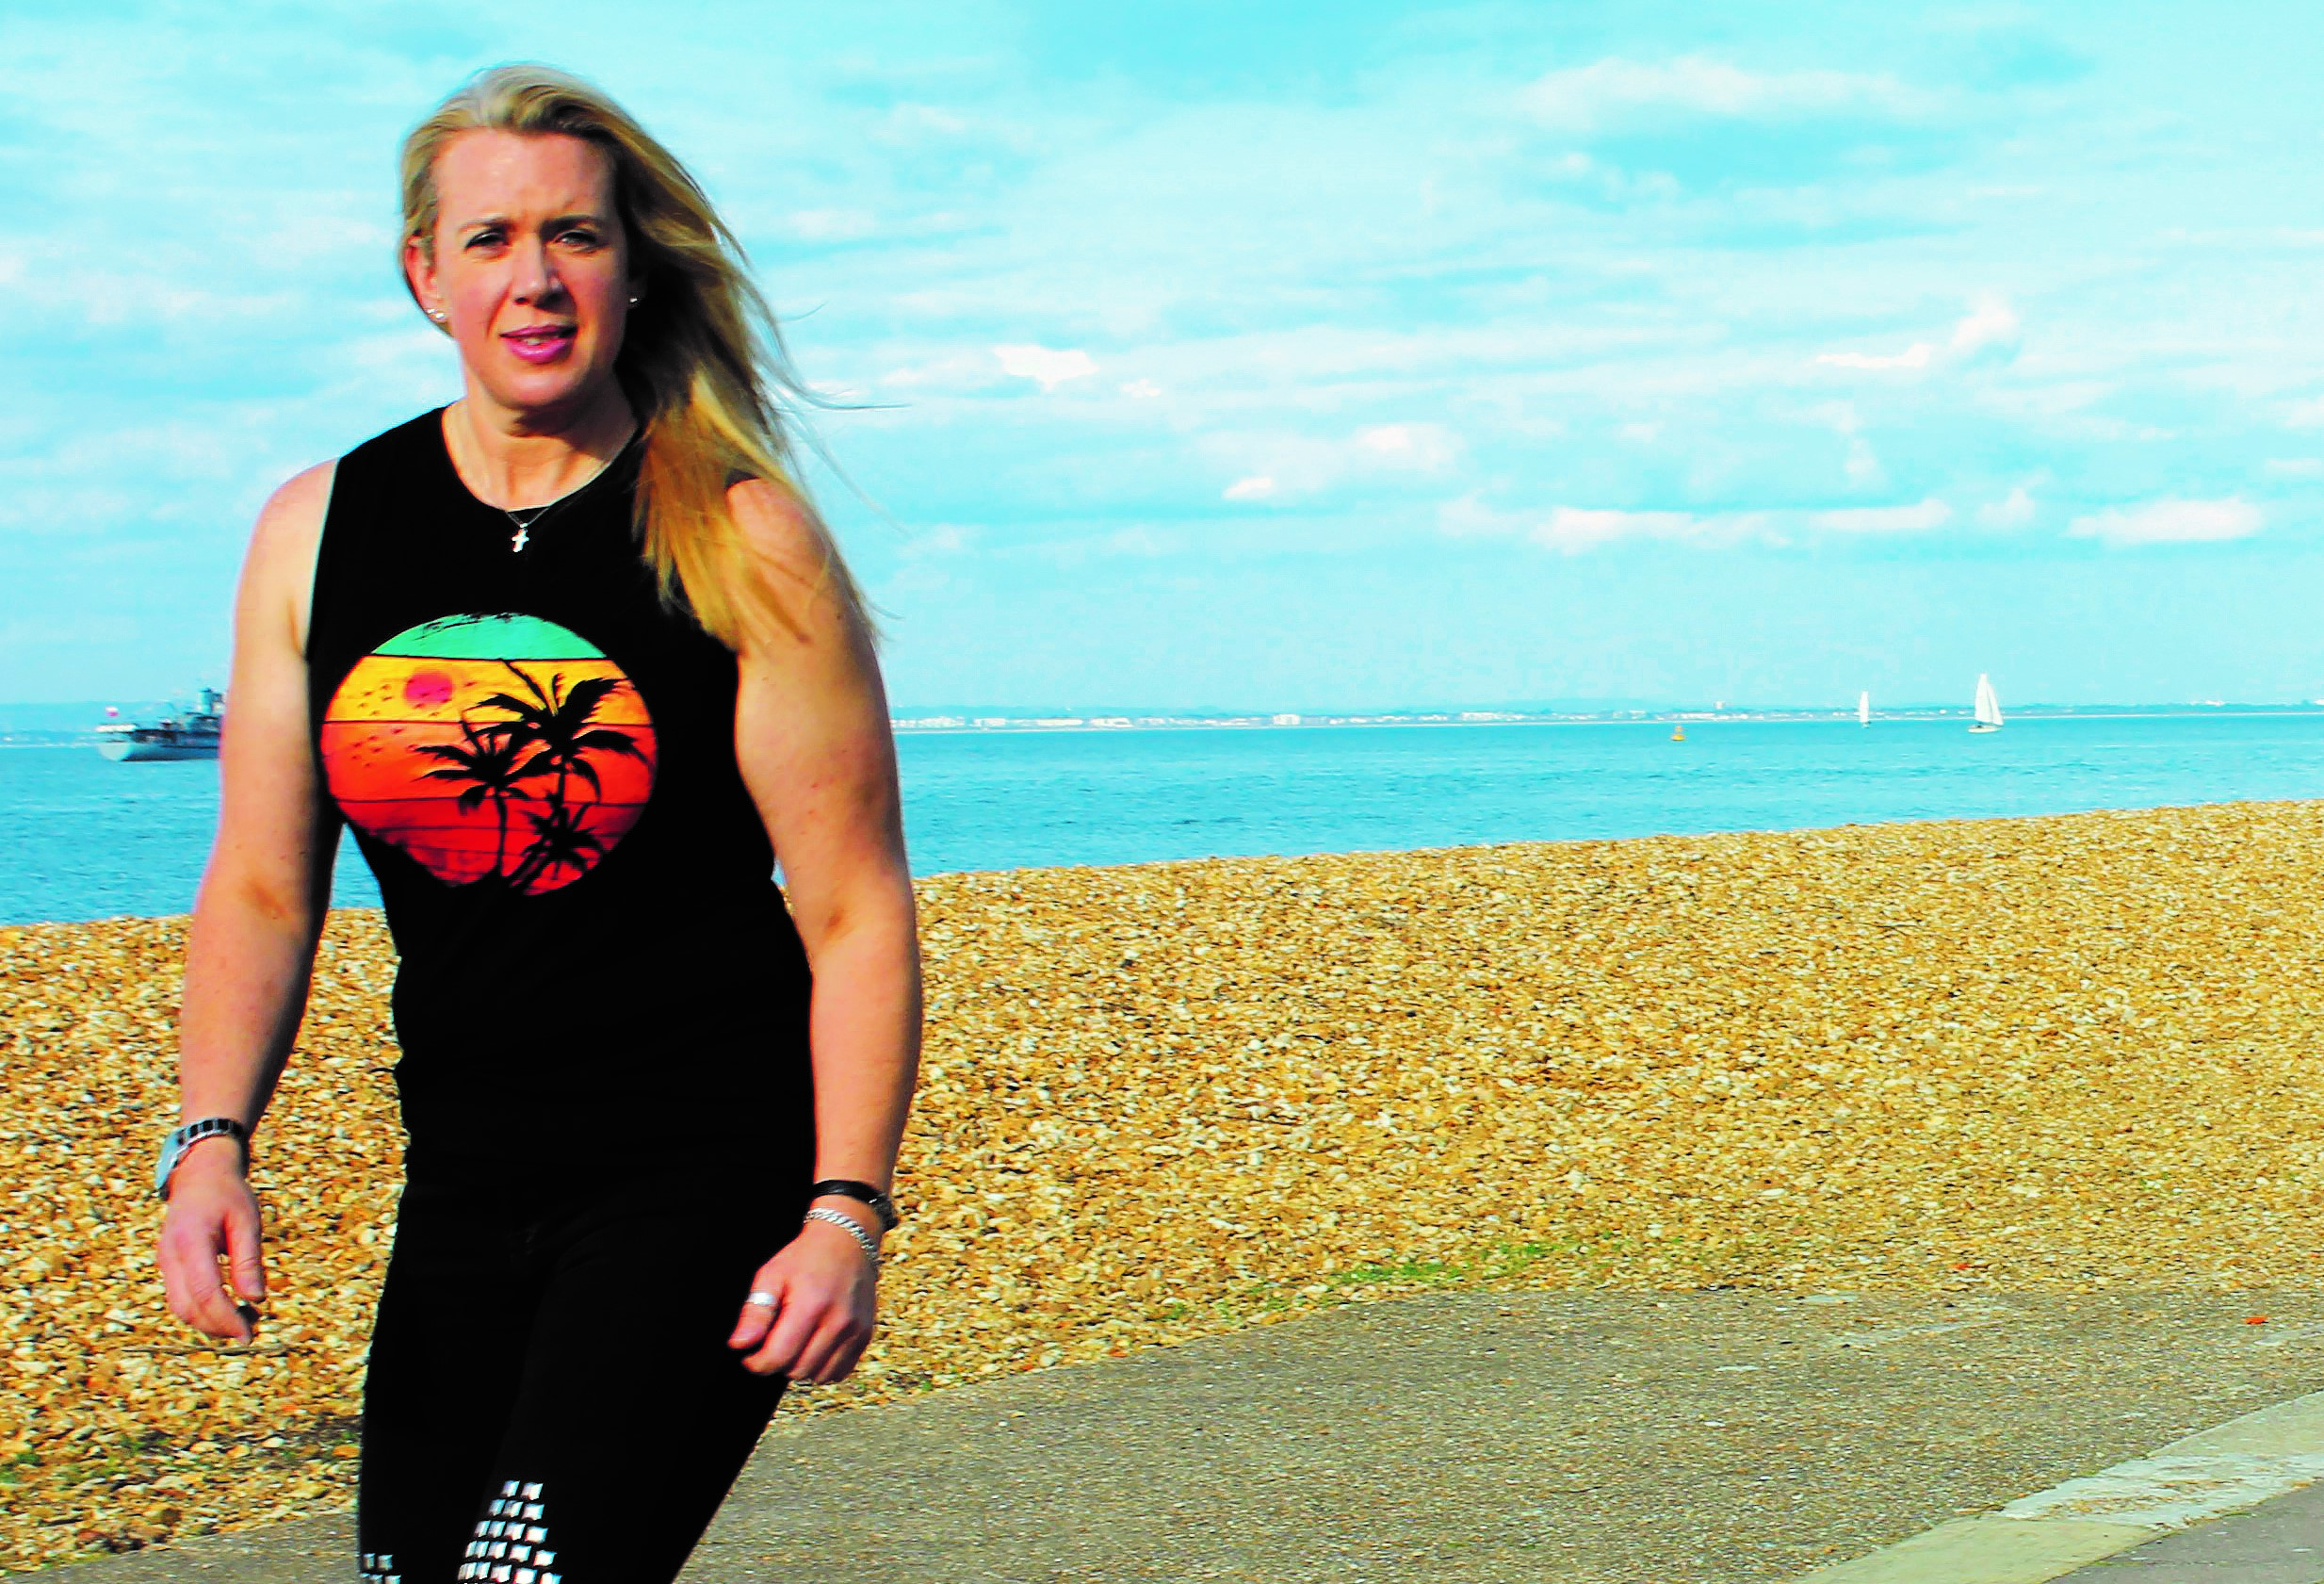 Natalie McAllister from Isle of Wight Roller Skaters, skating on the promenade of a beach